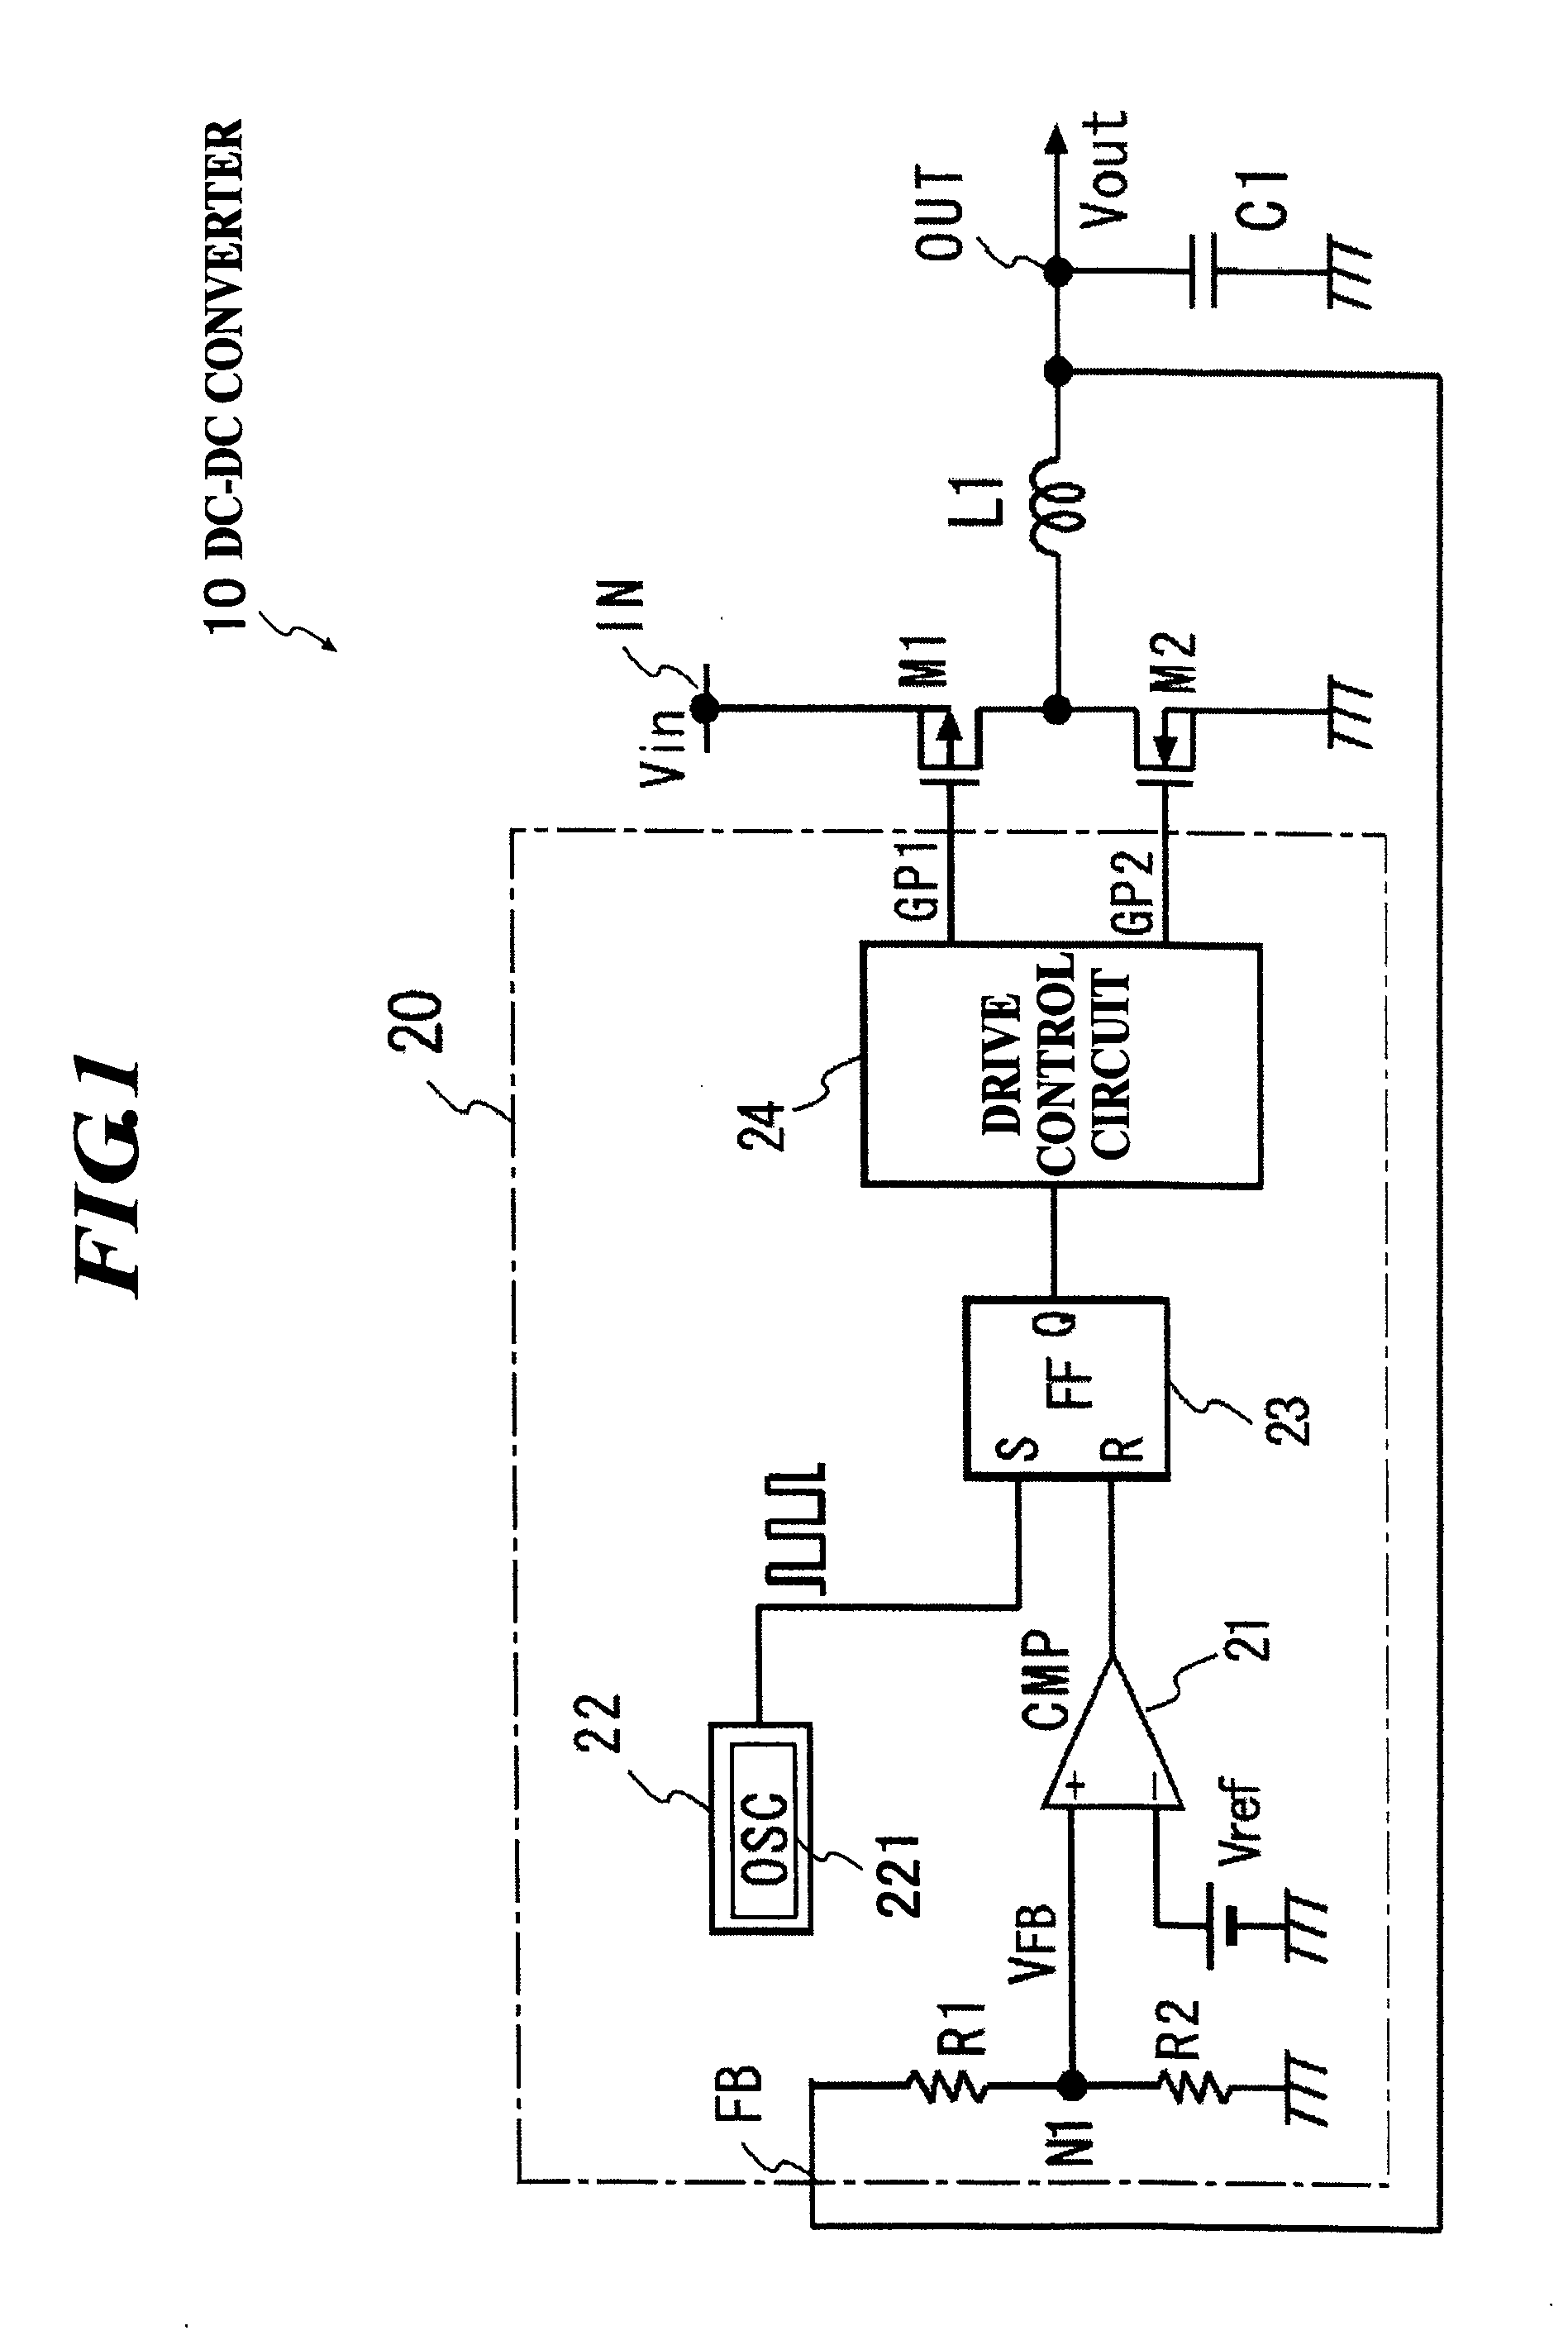 Dc-dc converter and switching control circuit